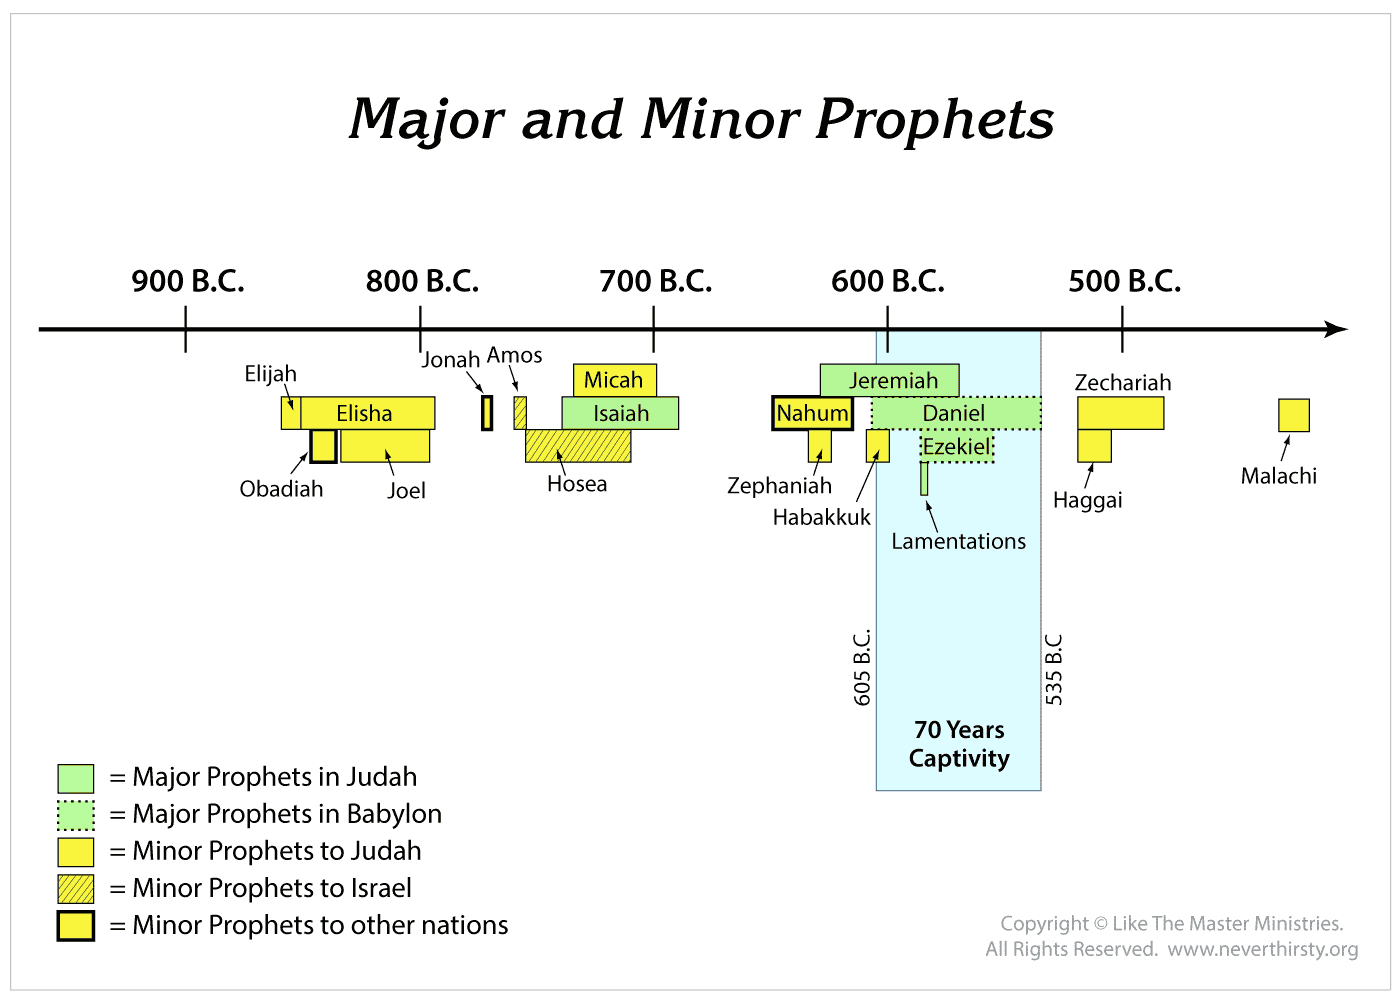 Timeline of the Major and Minor Prophets